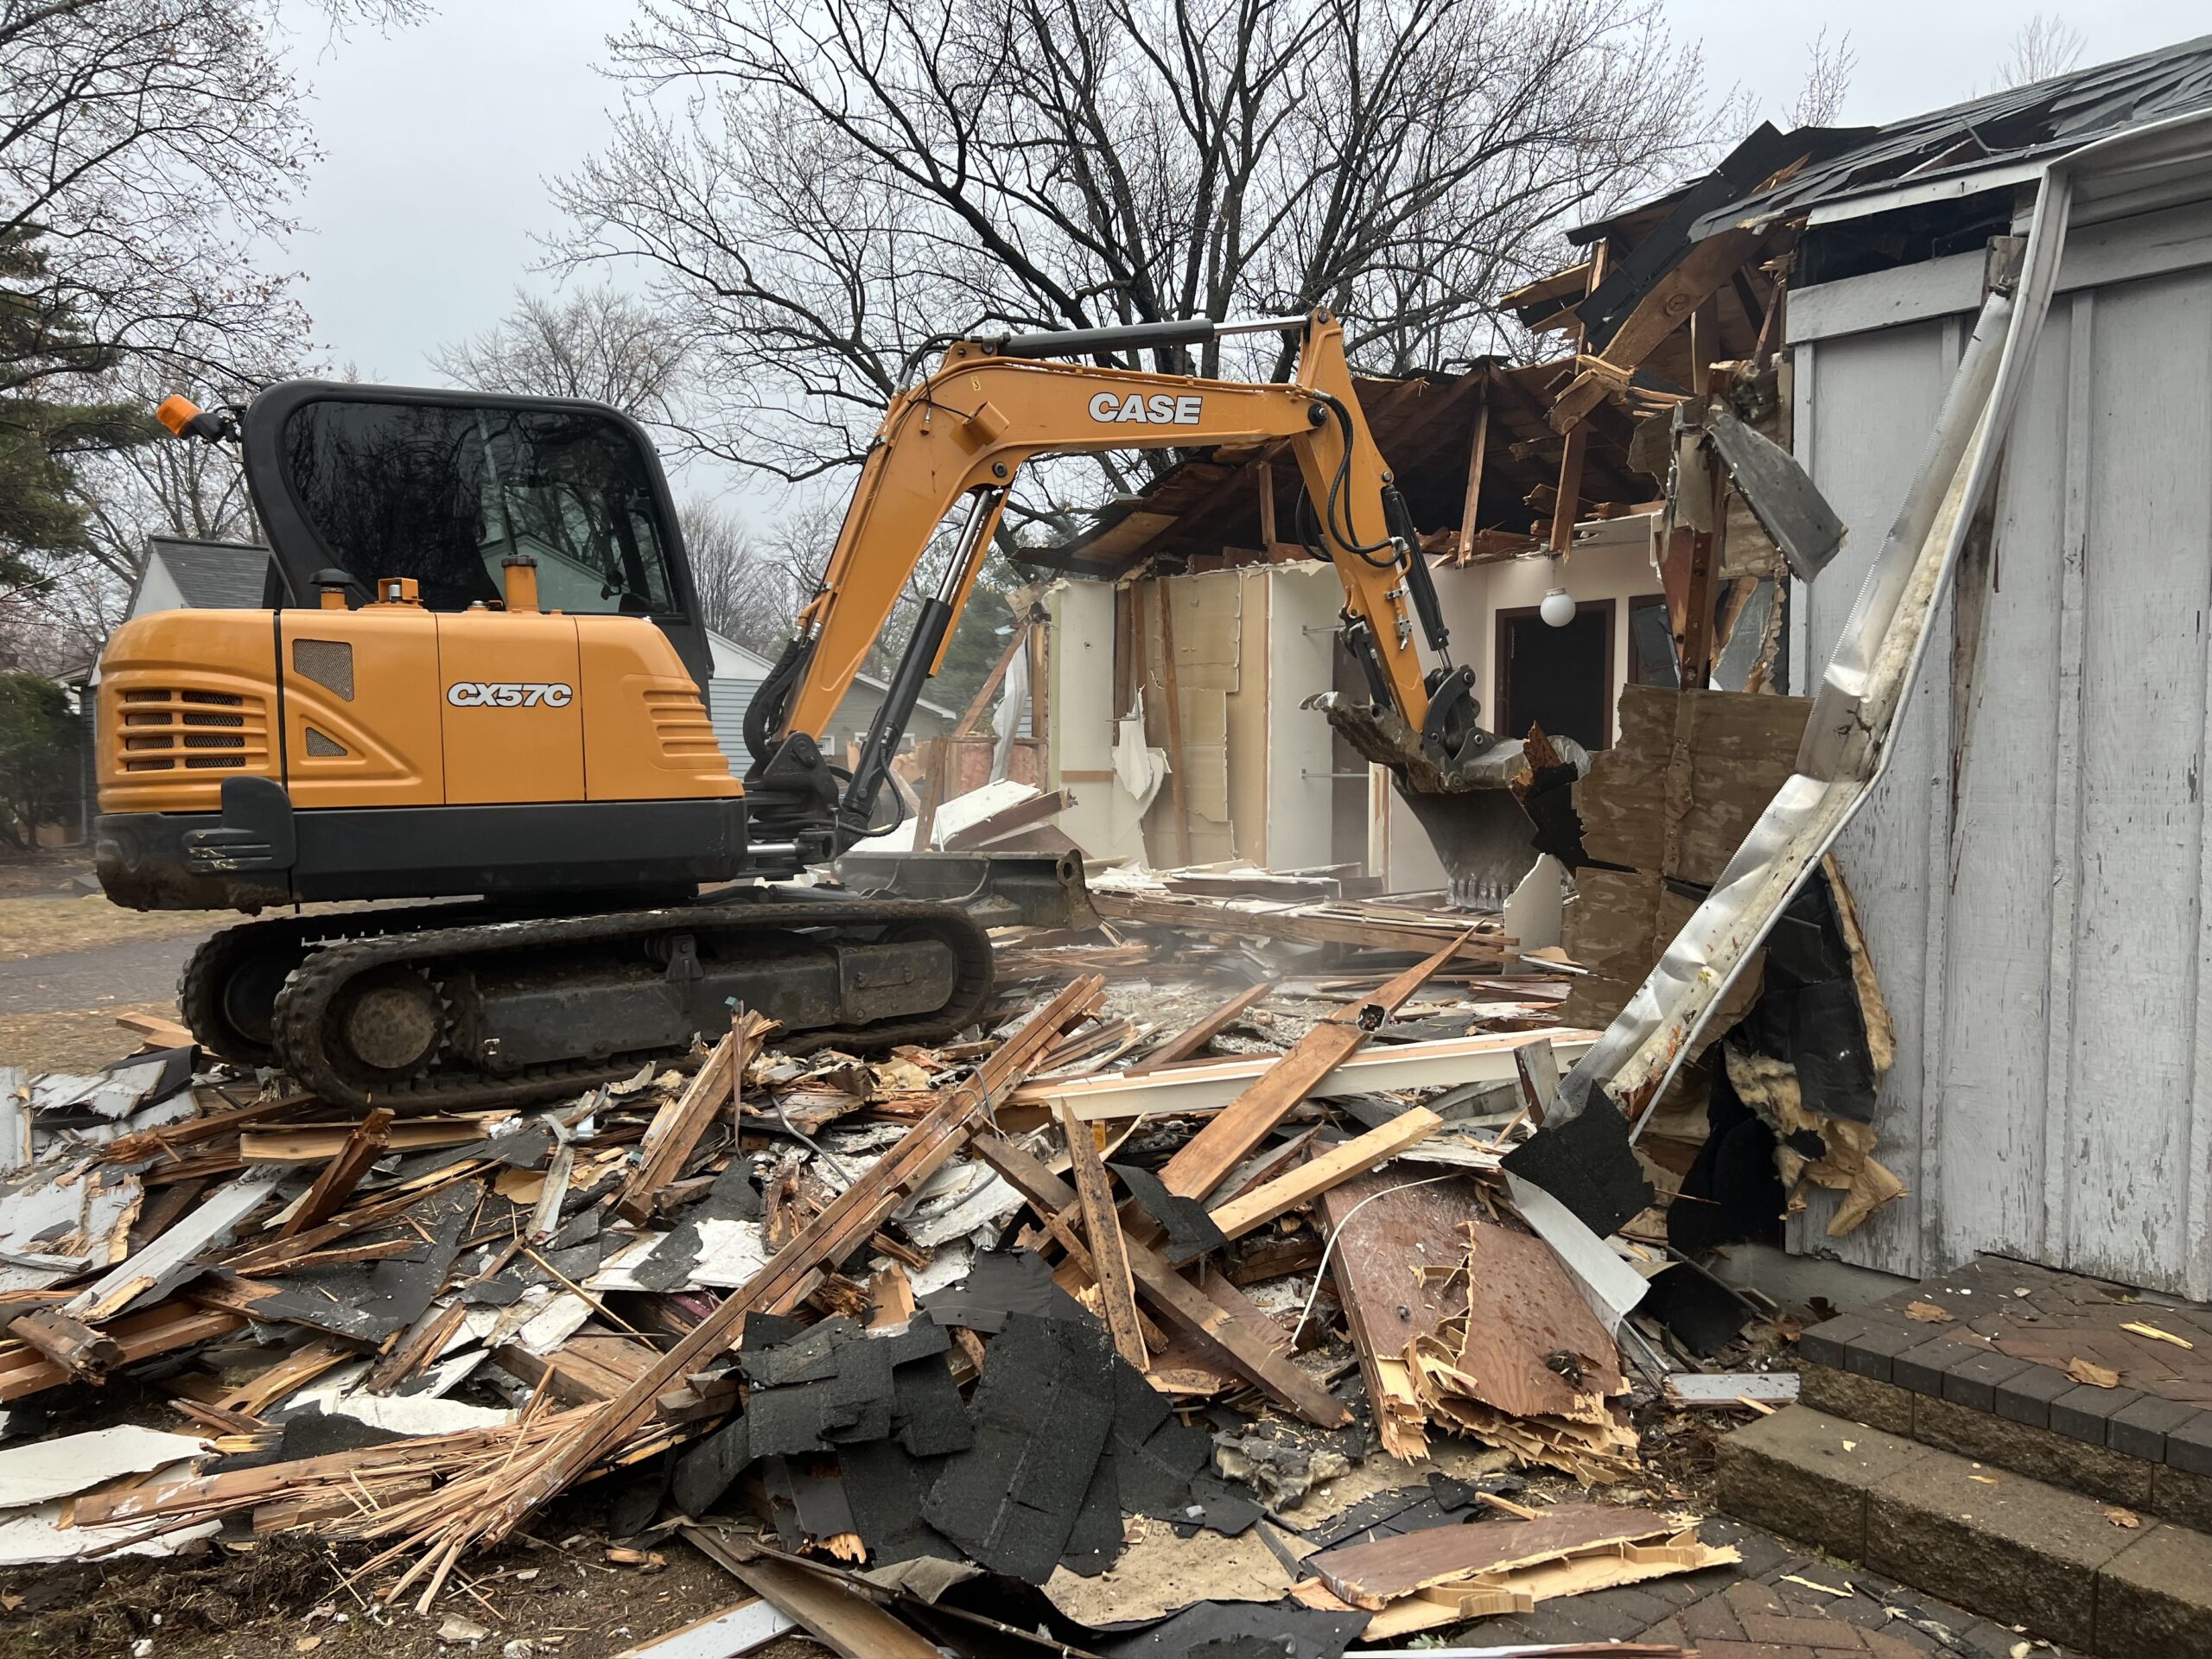 Structure Removal and Demolition services for residential and commercial applications and properties.